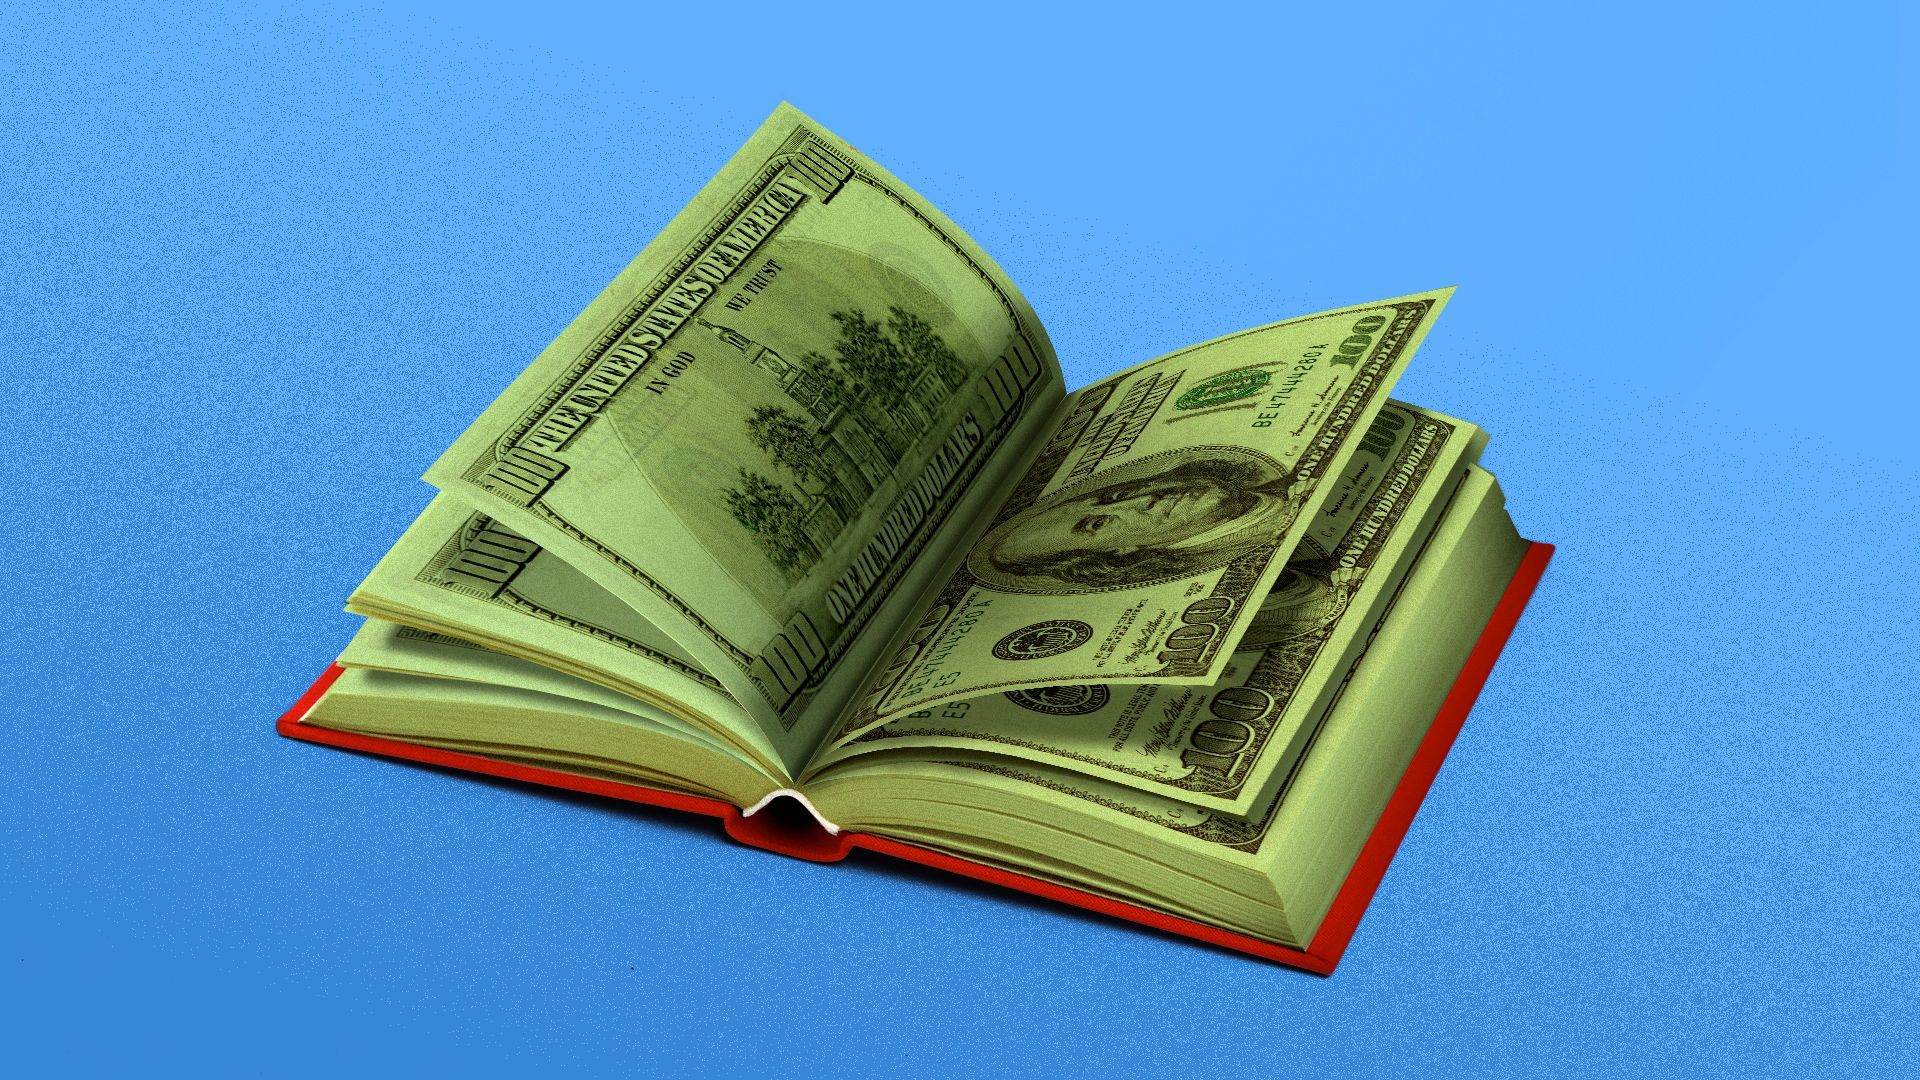 Illustration of a book with the pages made of money. 